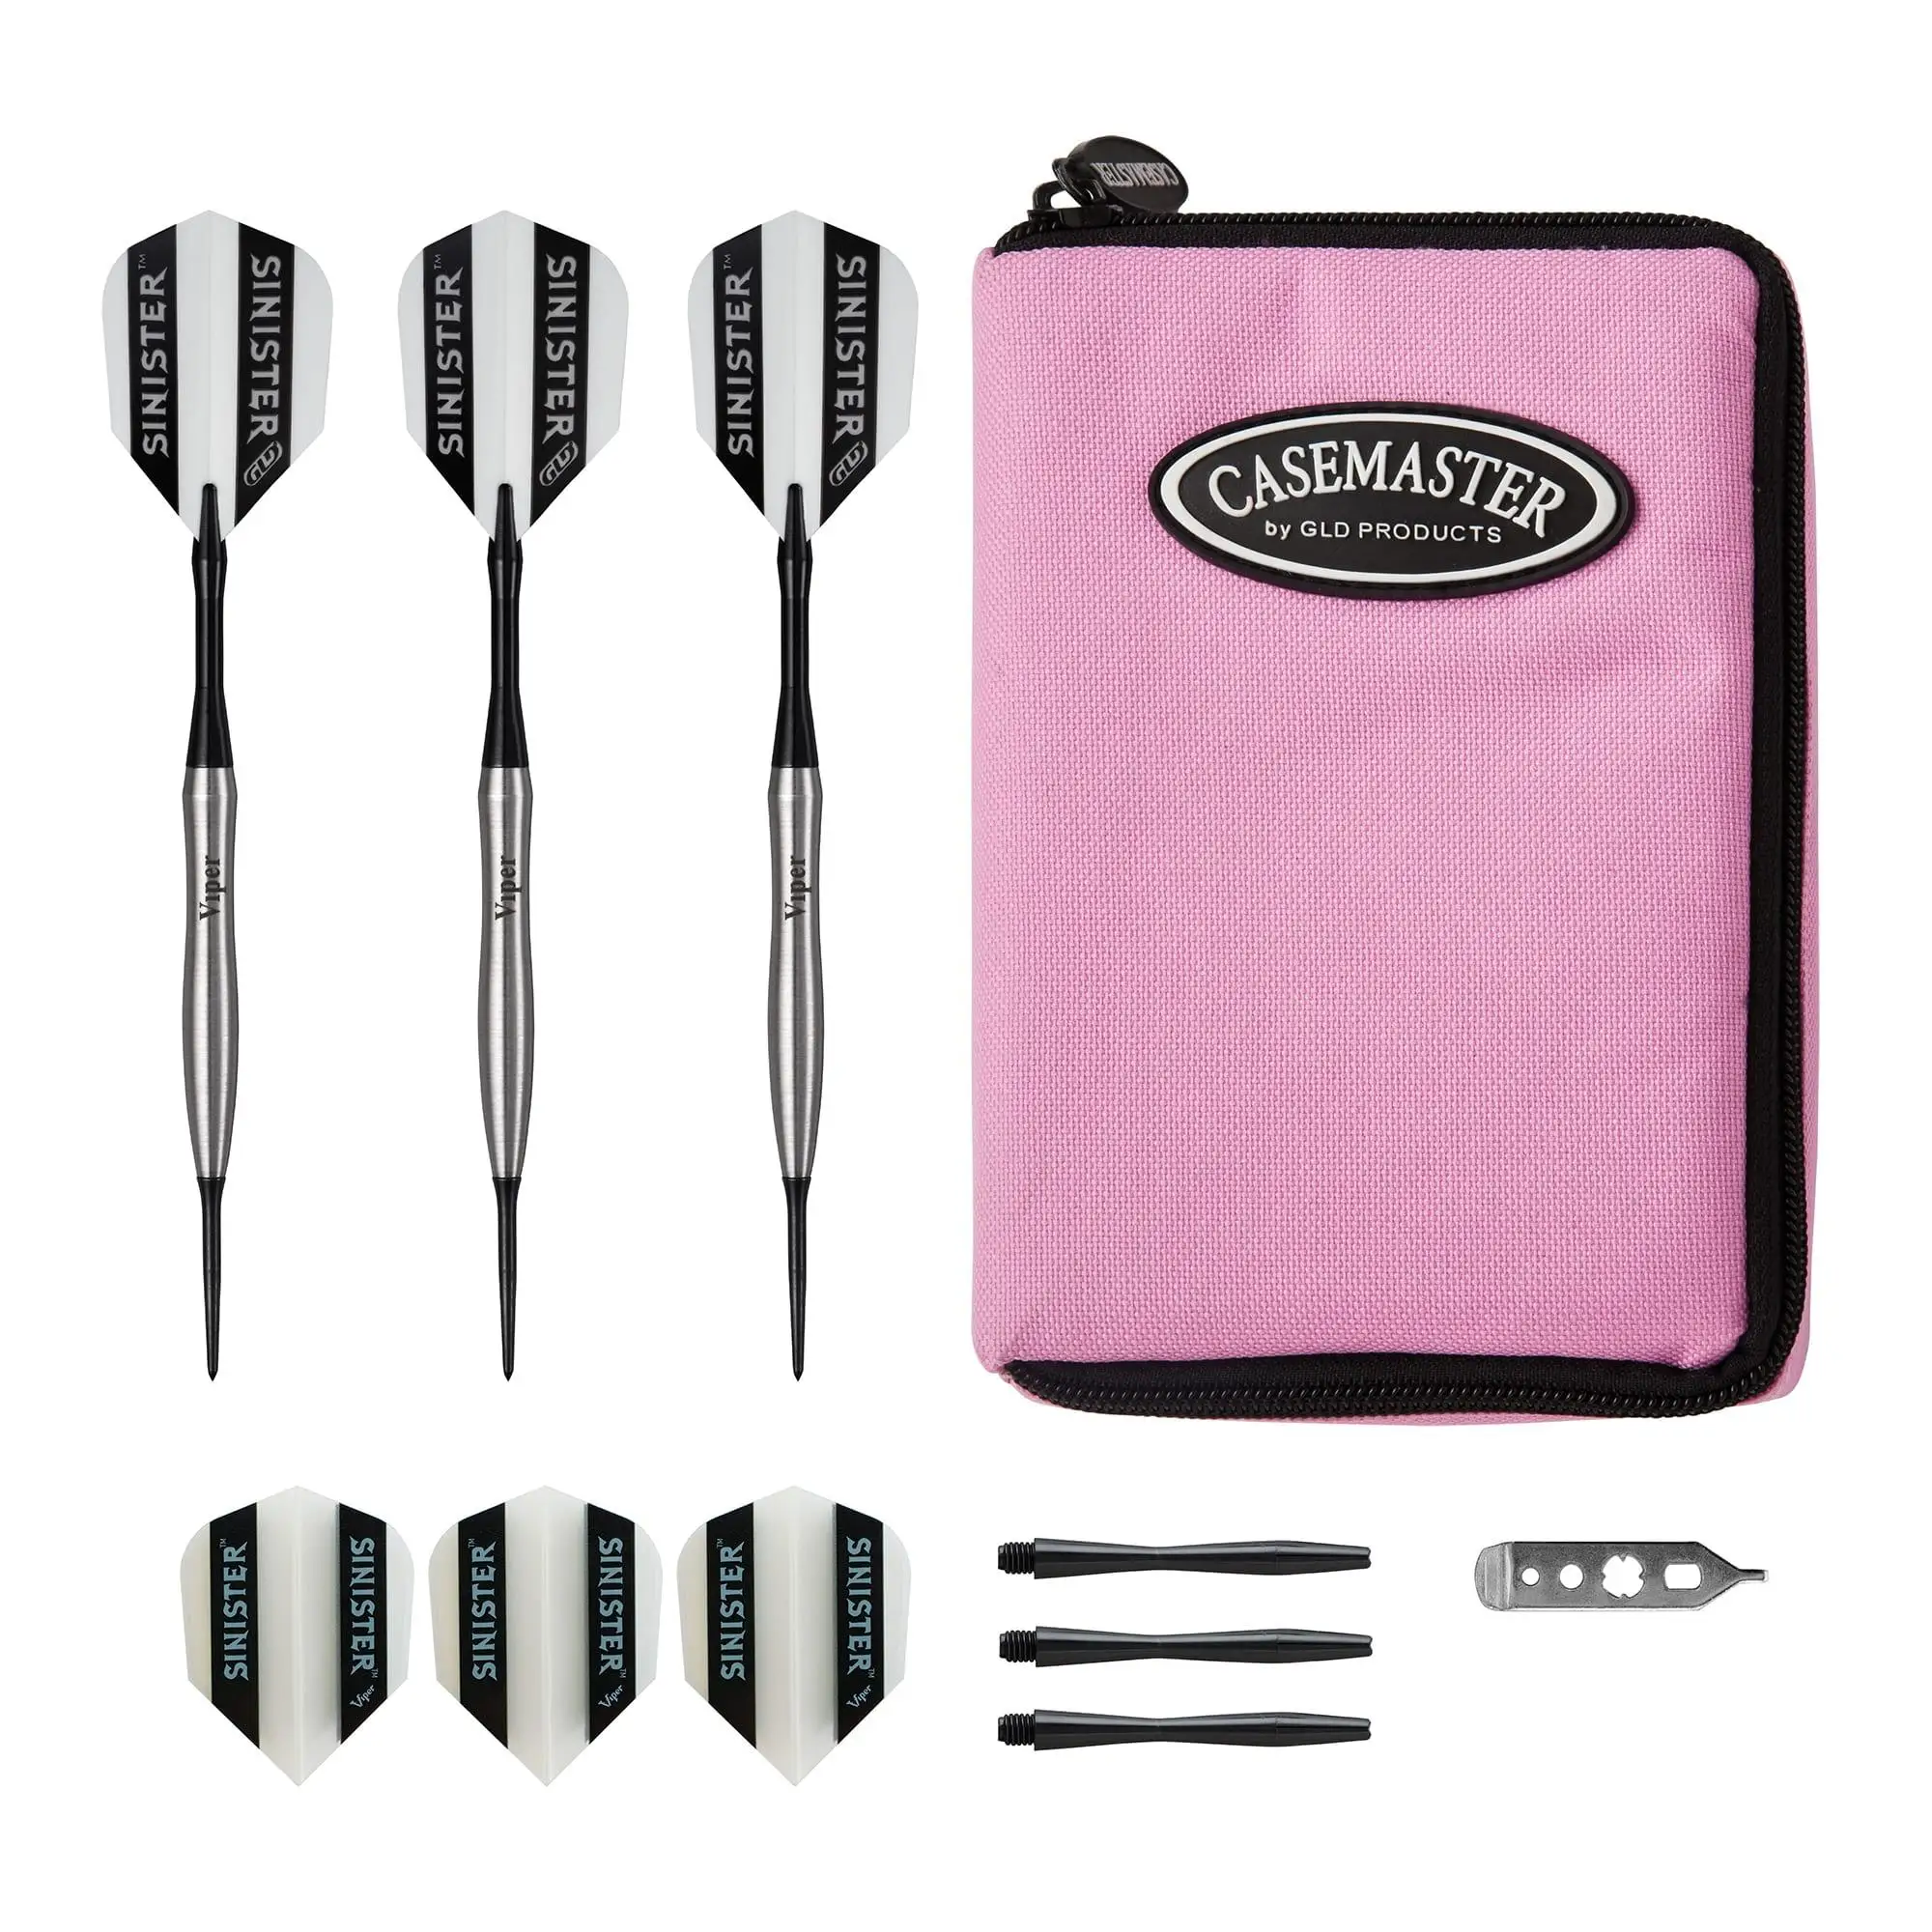 

Sinister Tungsten Steel Tip Darts 24 Grams and Casemaster Select Pink Nylon Dart Case